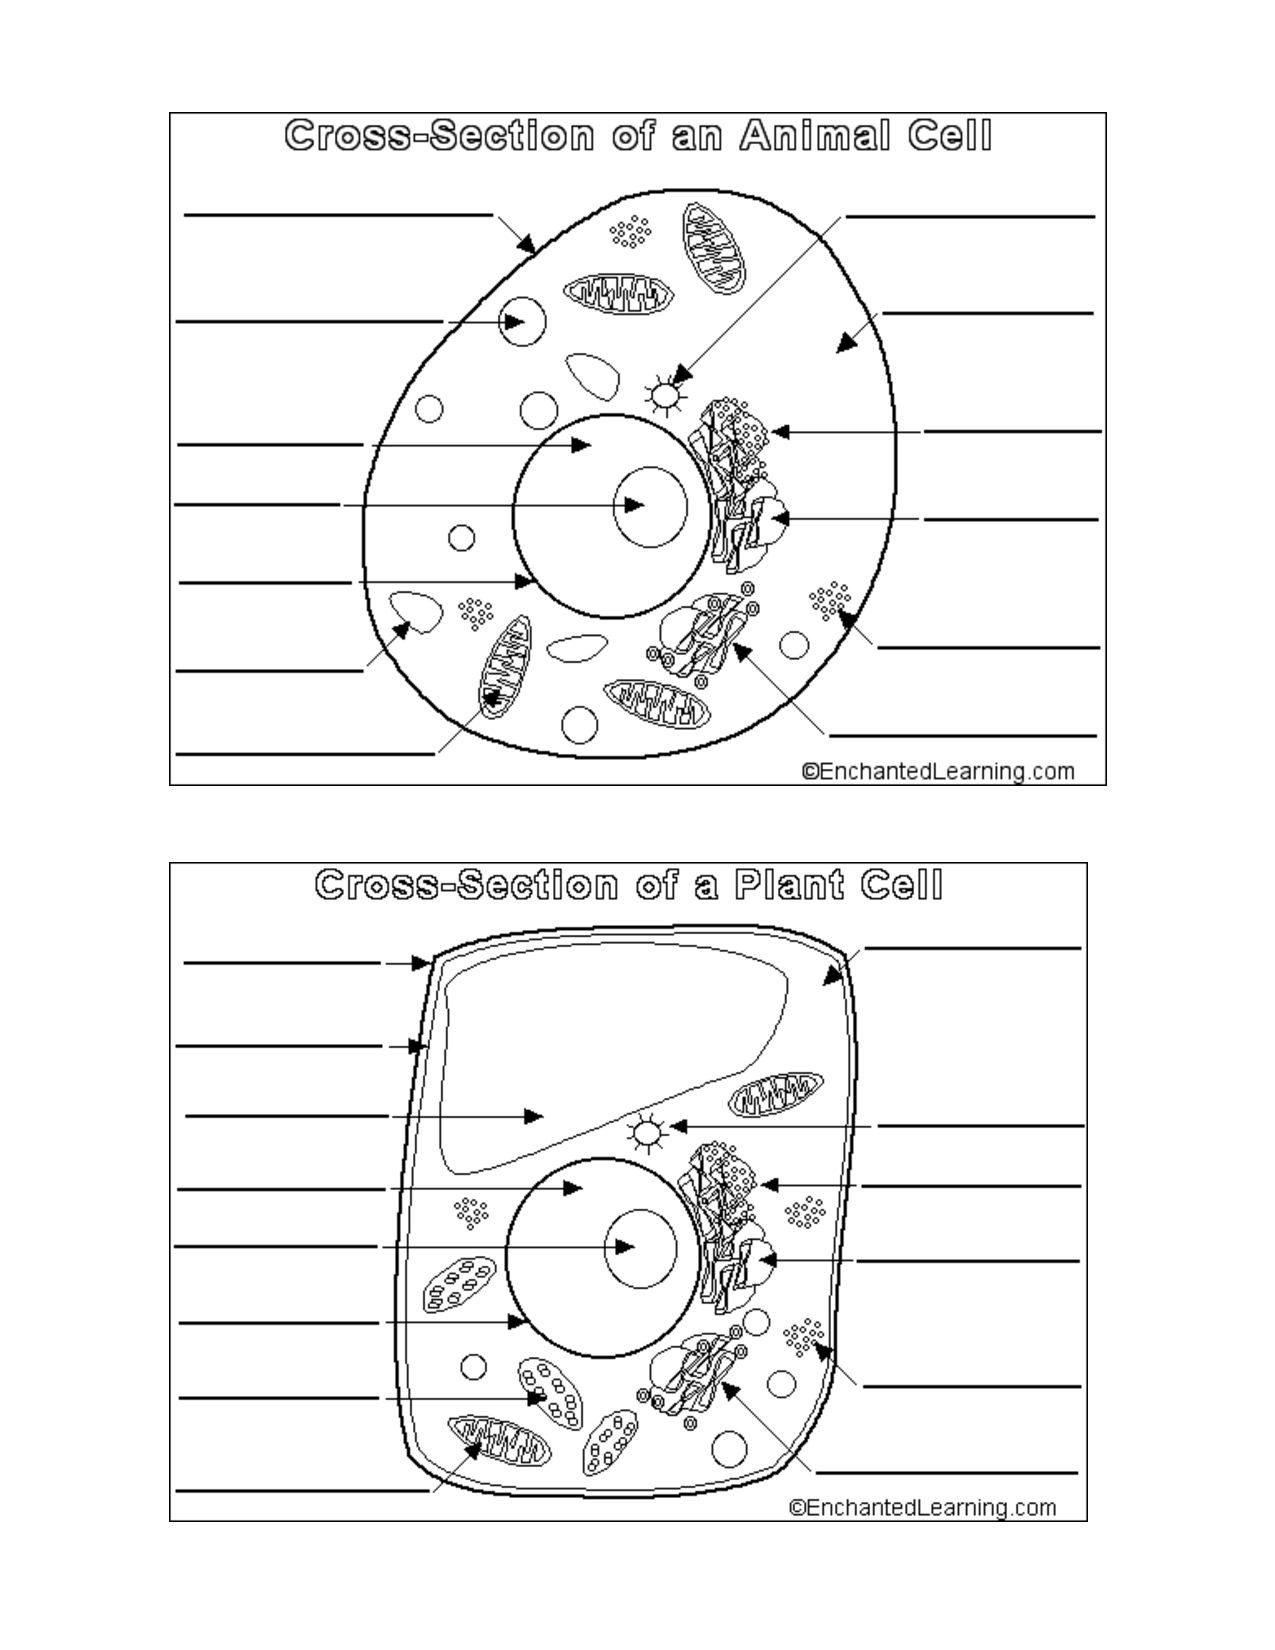 Animal and Plant Cells Worksheet à¸à¸±à¸à¸à¸´à¸à¹à¸à¸à¸­à¸£à¹à¸ Education